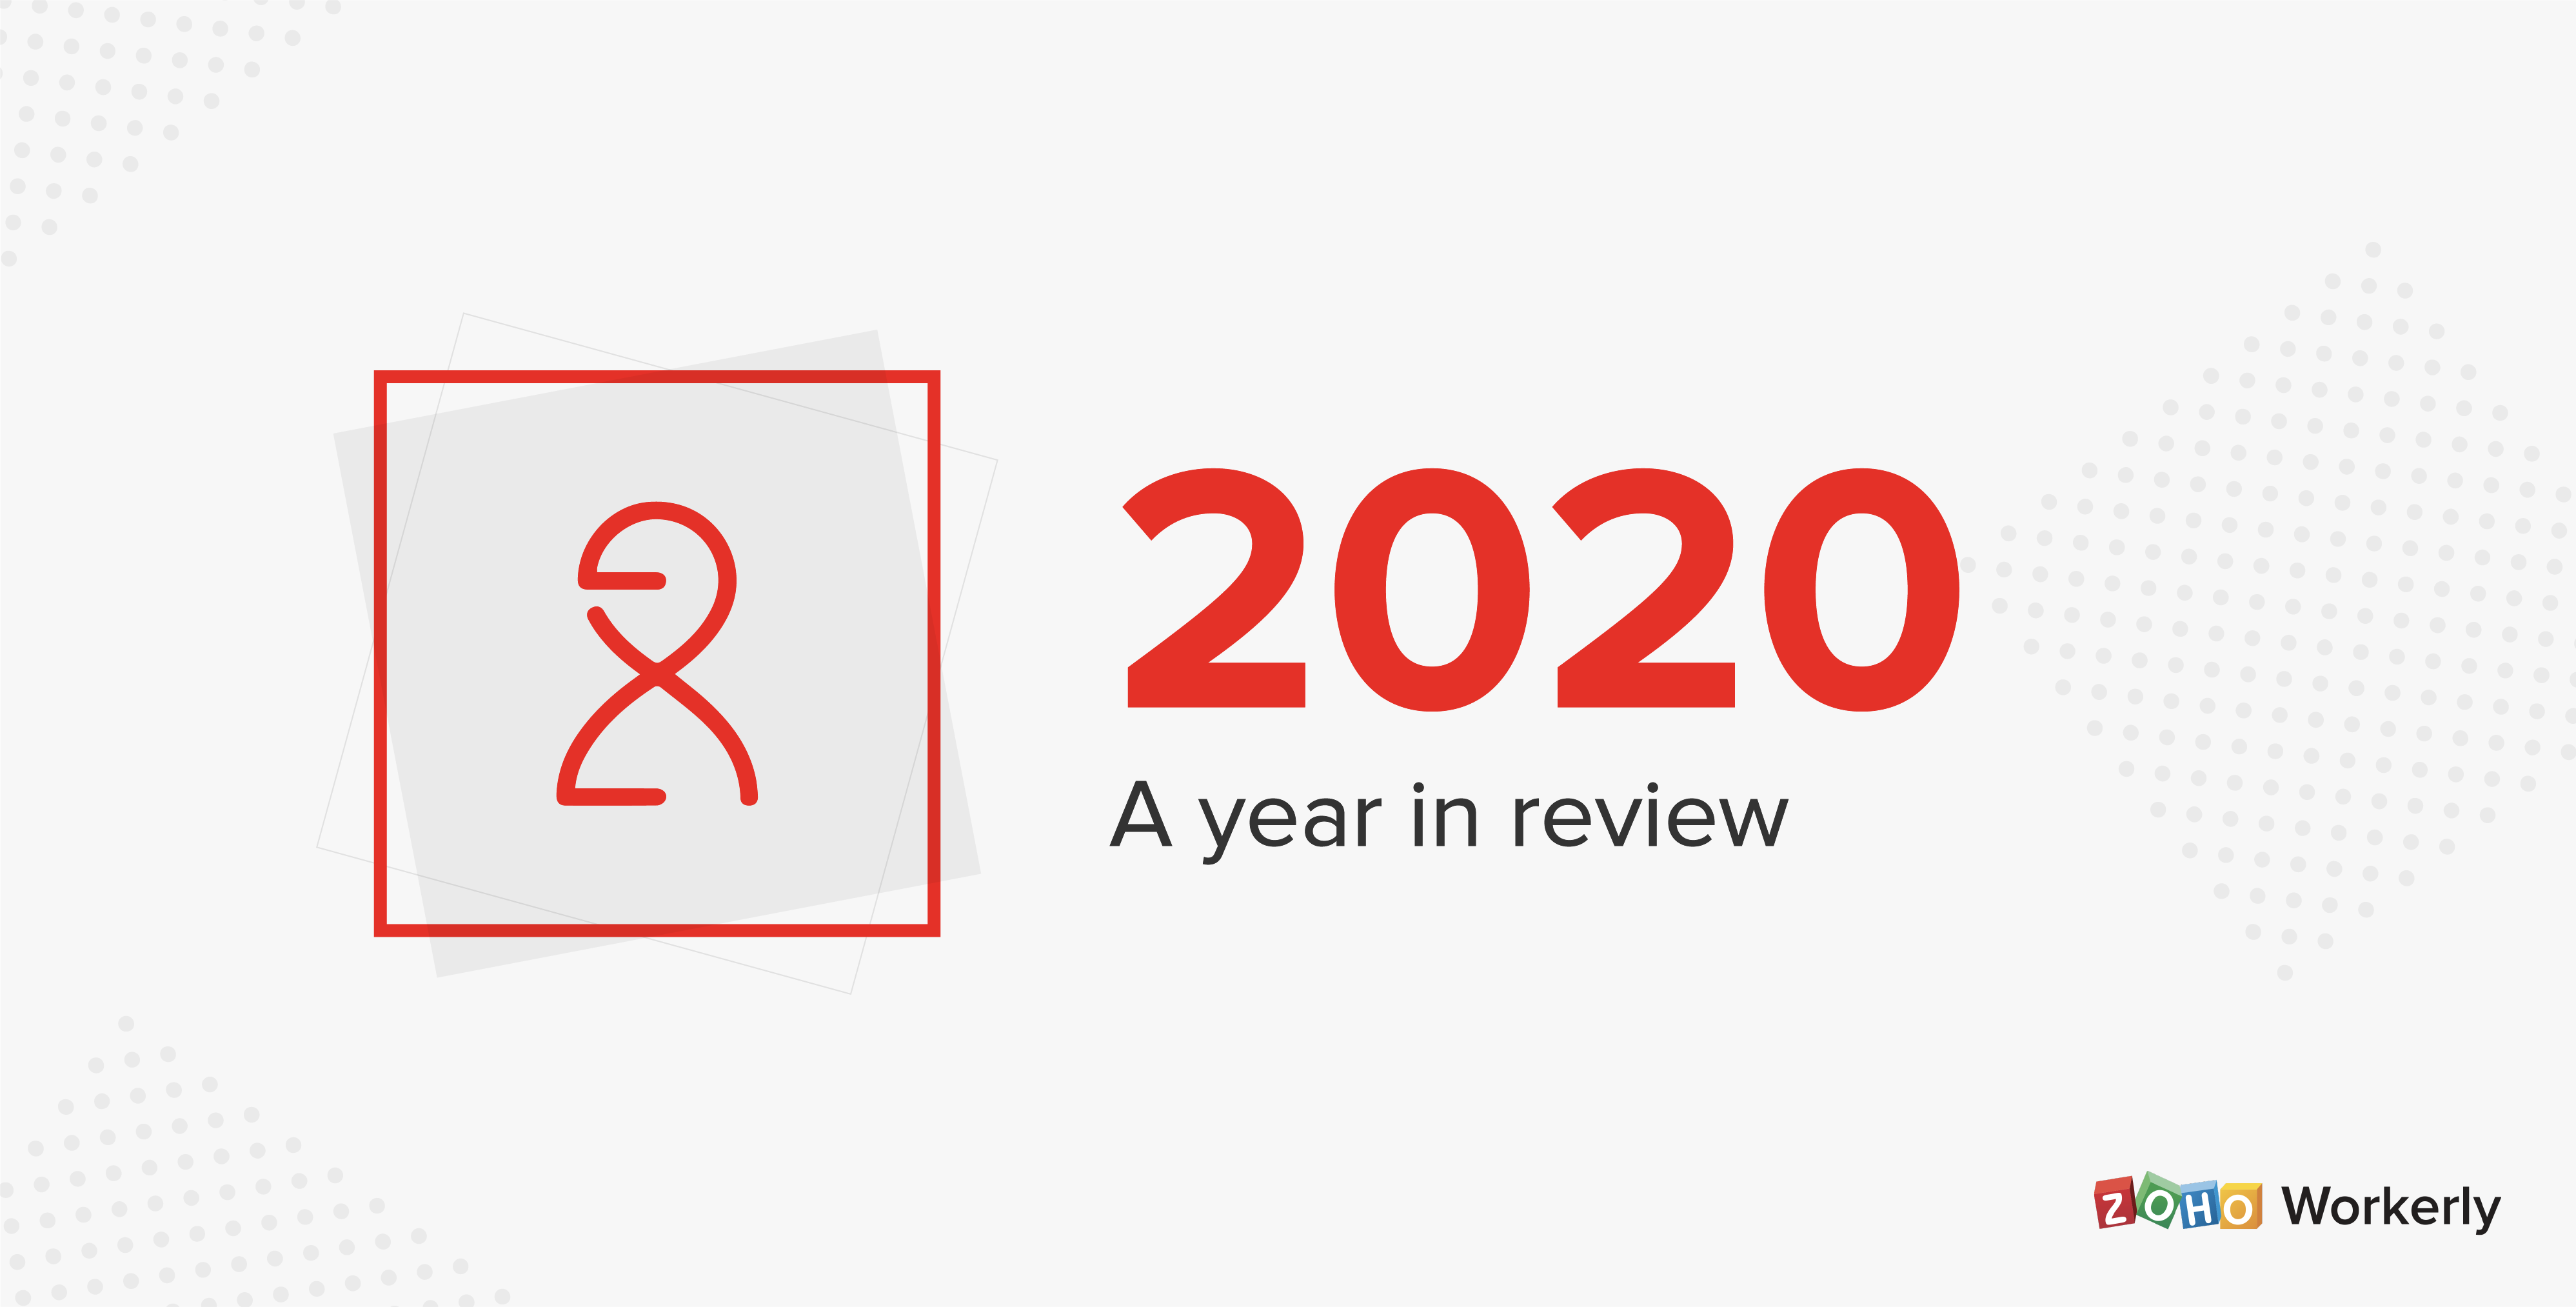 Zoho Workerly in 2020: A year in review